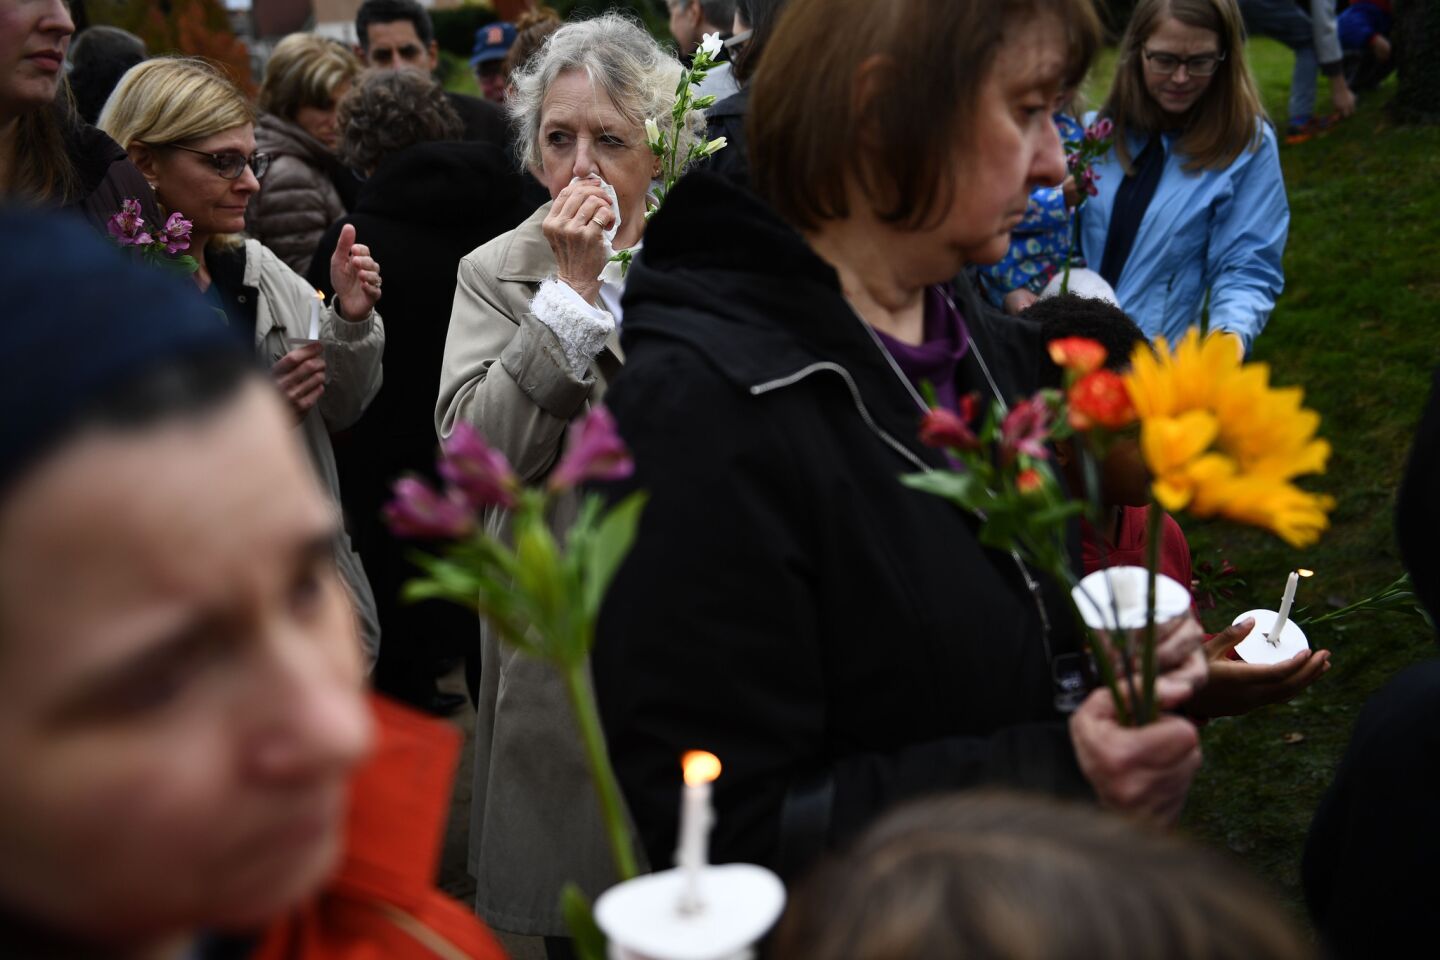 People arrive to pay respects at a memorial outside the Tree of Life synagogue on Oct. 28, 2018, after a shooting there the previous day left 11 people dead in the Squirrel Hill neighborhood of Pittsburgh.